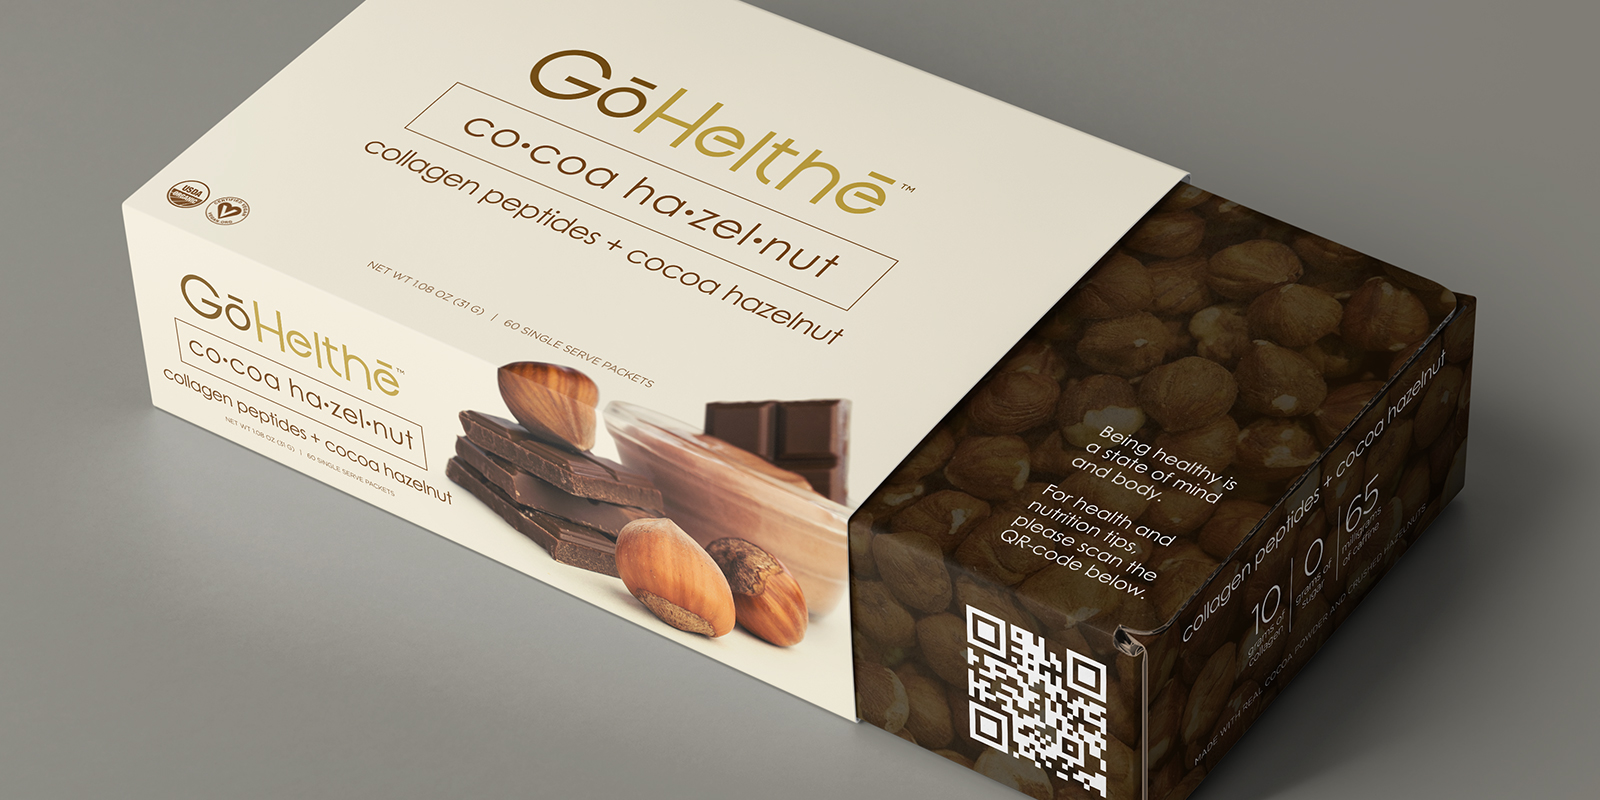 Go Helthe Cocoa Hazelnut Collagen Peptides Sleeve Packaging